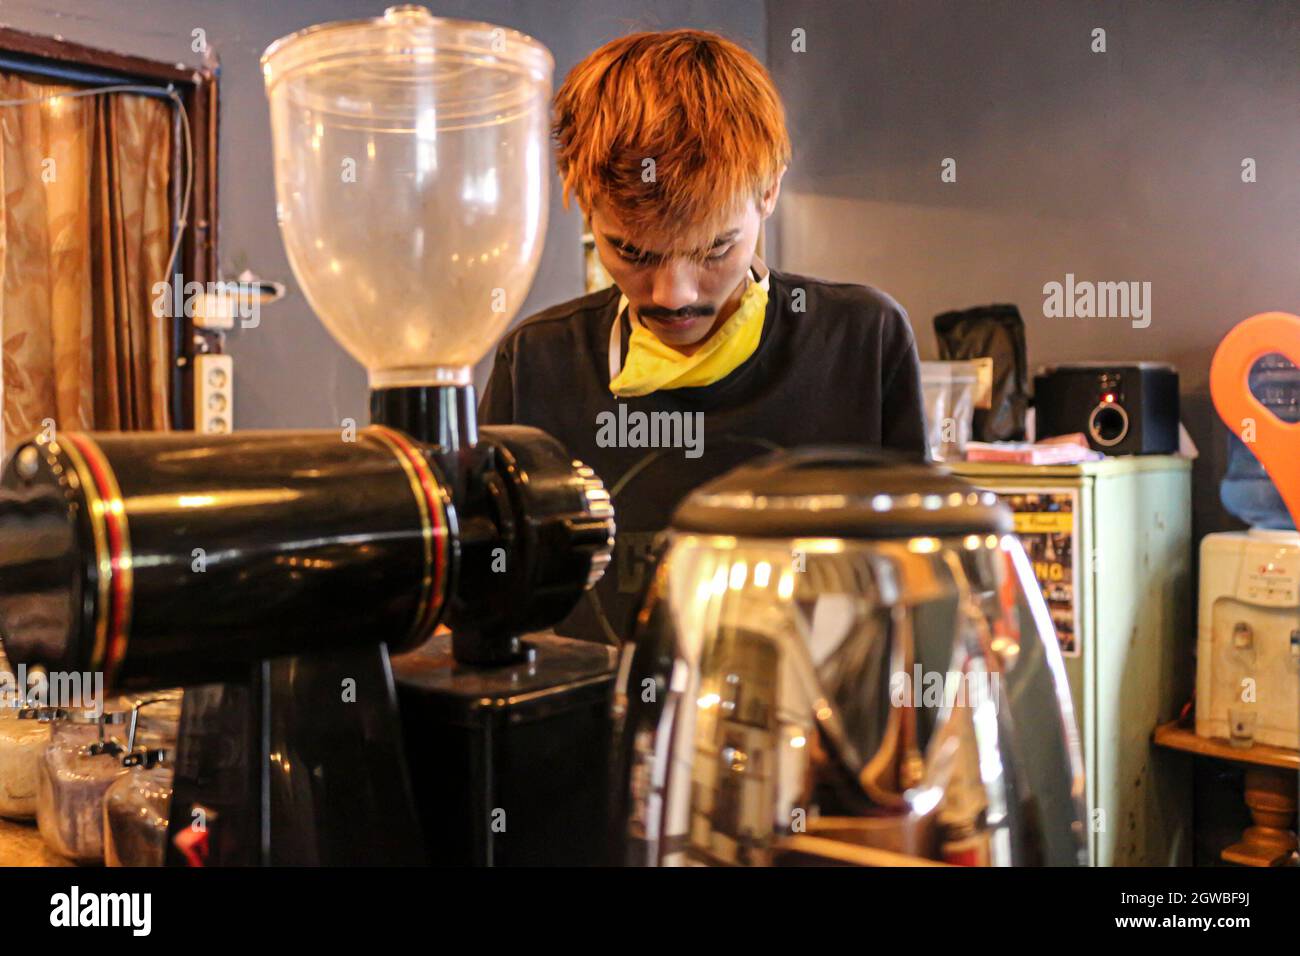 View Of Barista Working In Cafe Stock Photo